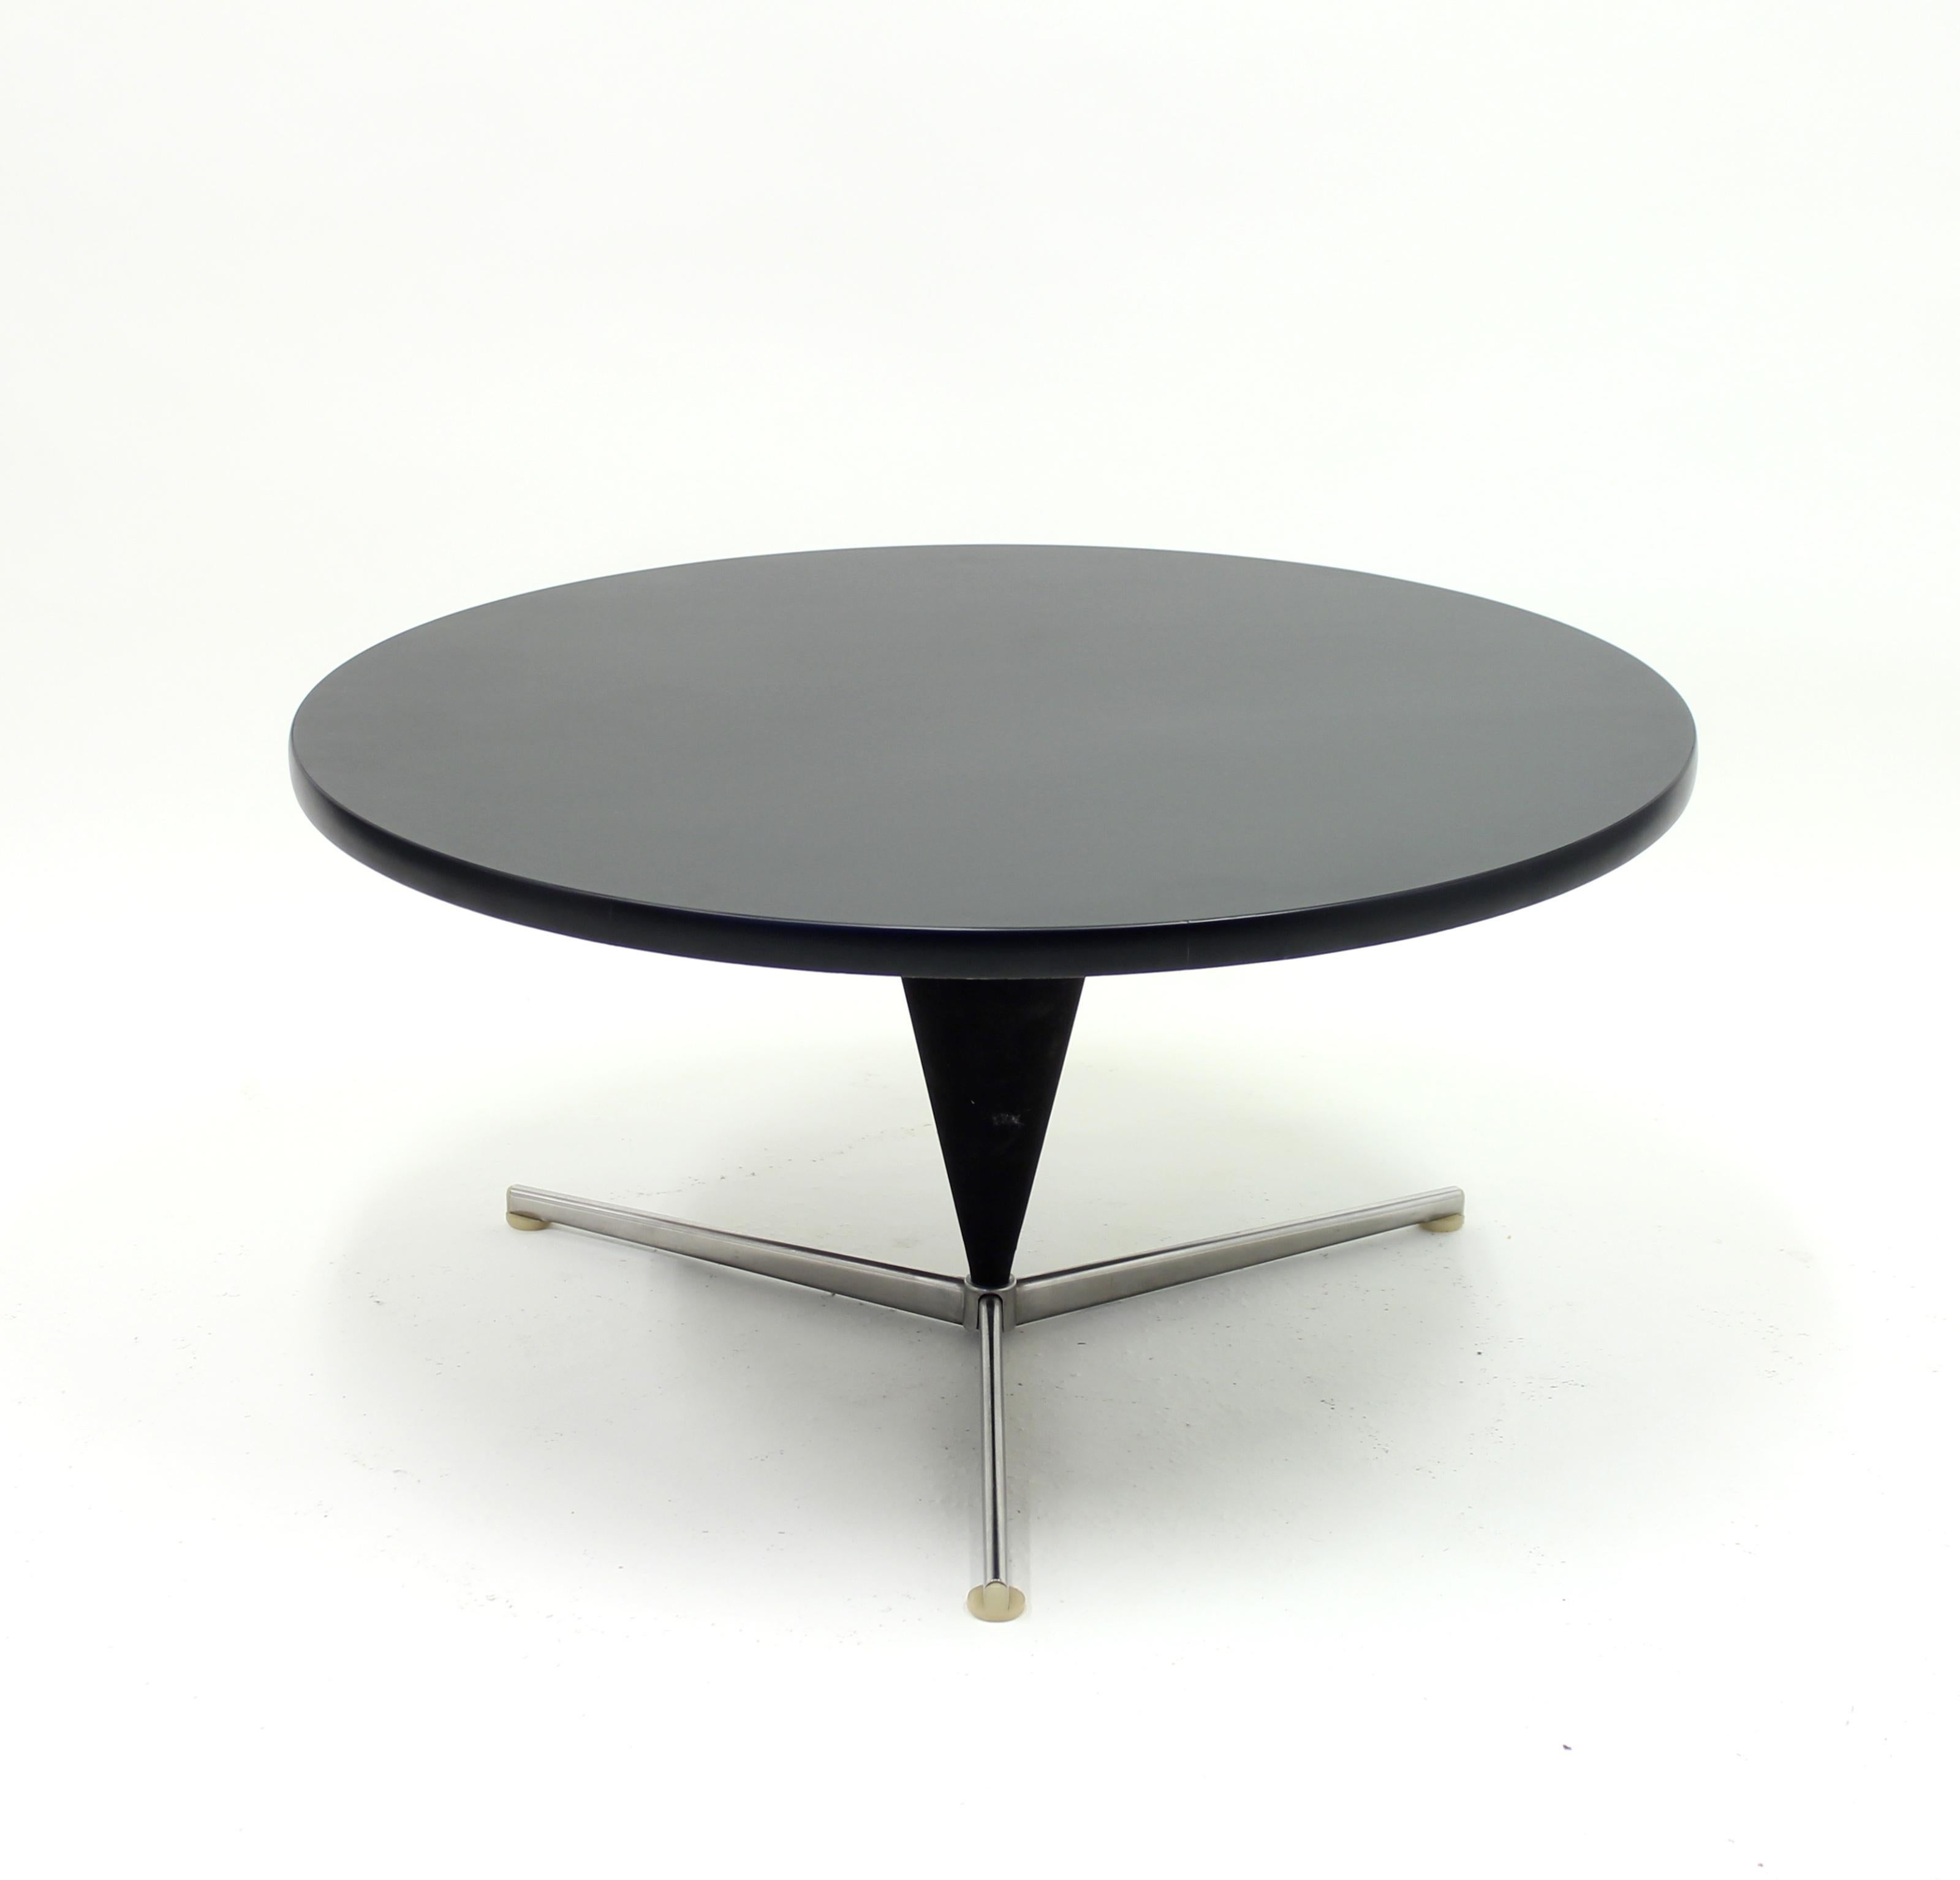 Early production, three-legged cone table by Verner Panton for Plus-Linje produced in the late 1950s-early 1960s. The three legged version was only produced the first years of production. New black lacquer on the tabletop. Otherwise untouched